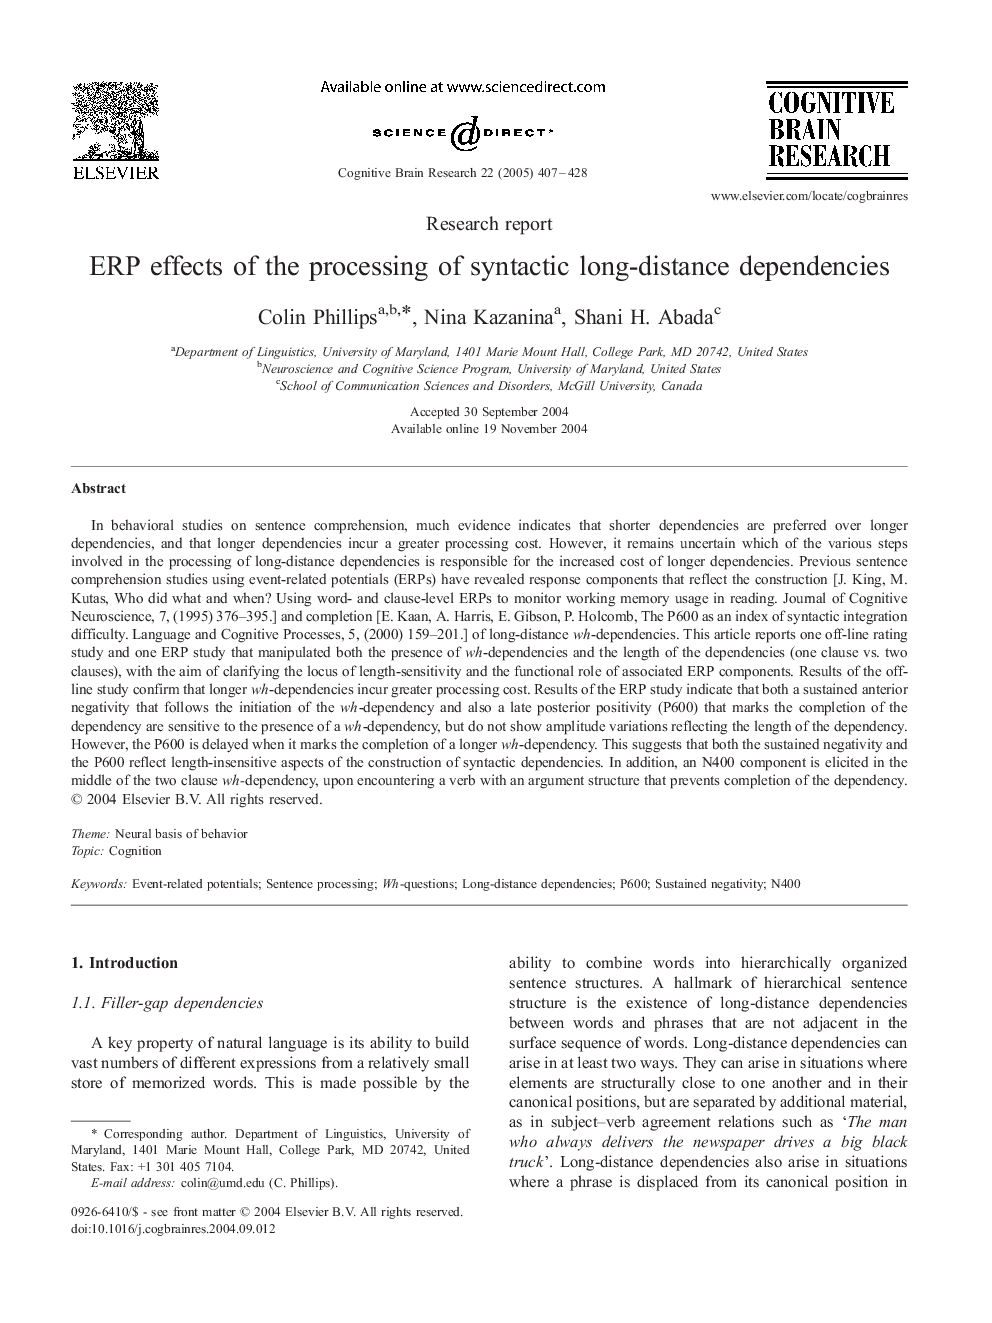 ERP effects of the processing of syntactic long-distance dependencies